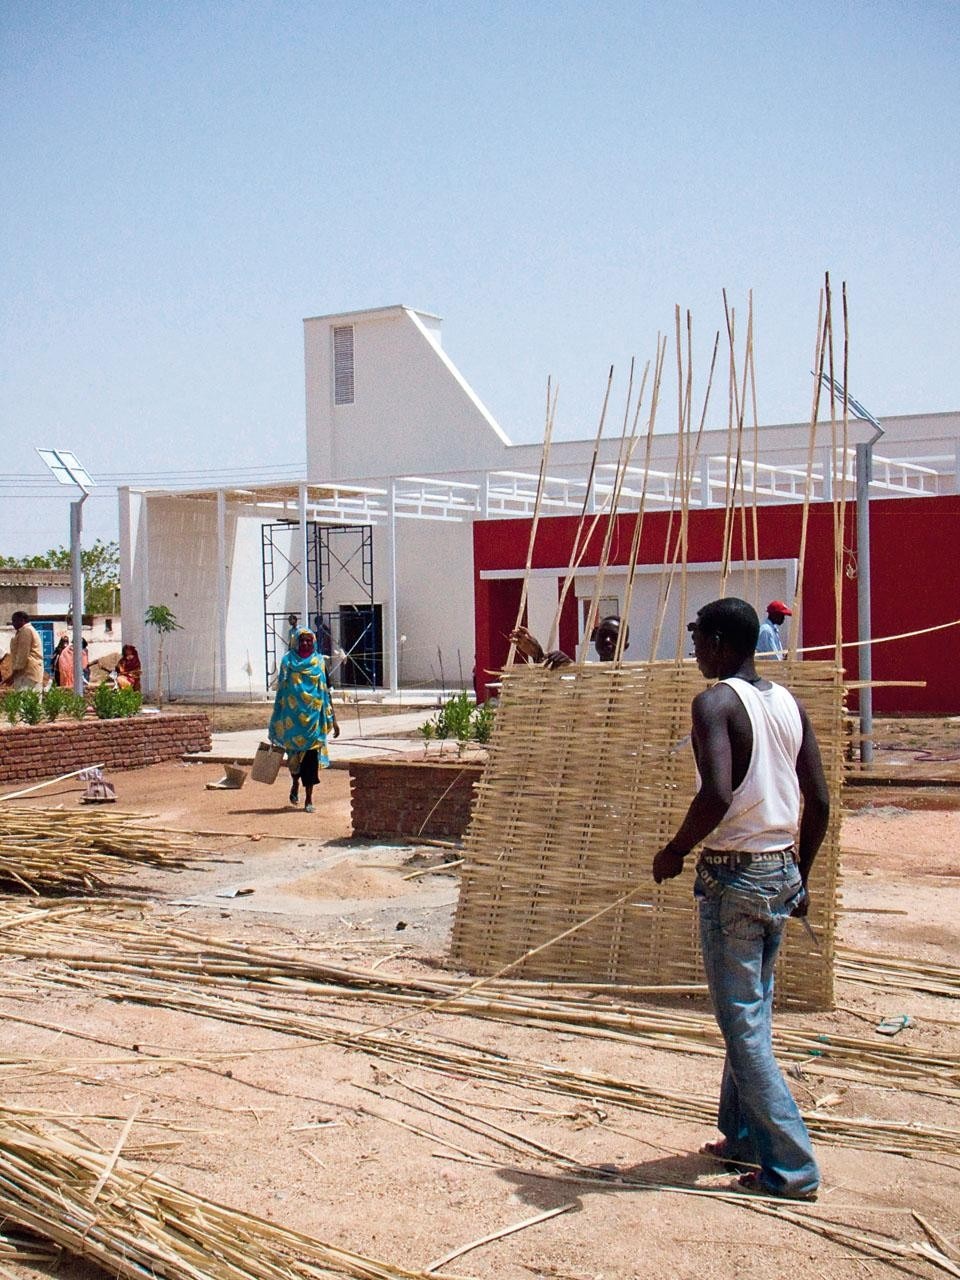 The use of woven bamboo
screens to protect corridors
and rest areas is inspired
by traditional techniques
employed to make fences
like the ones used in refugee
camps.